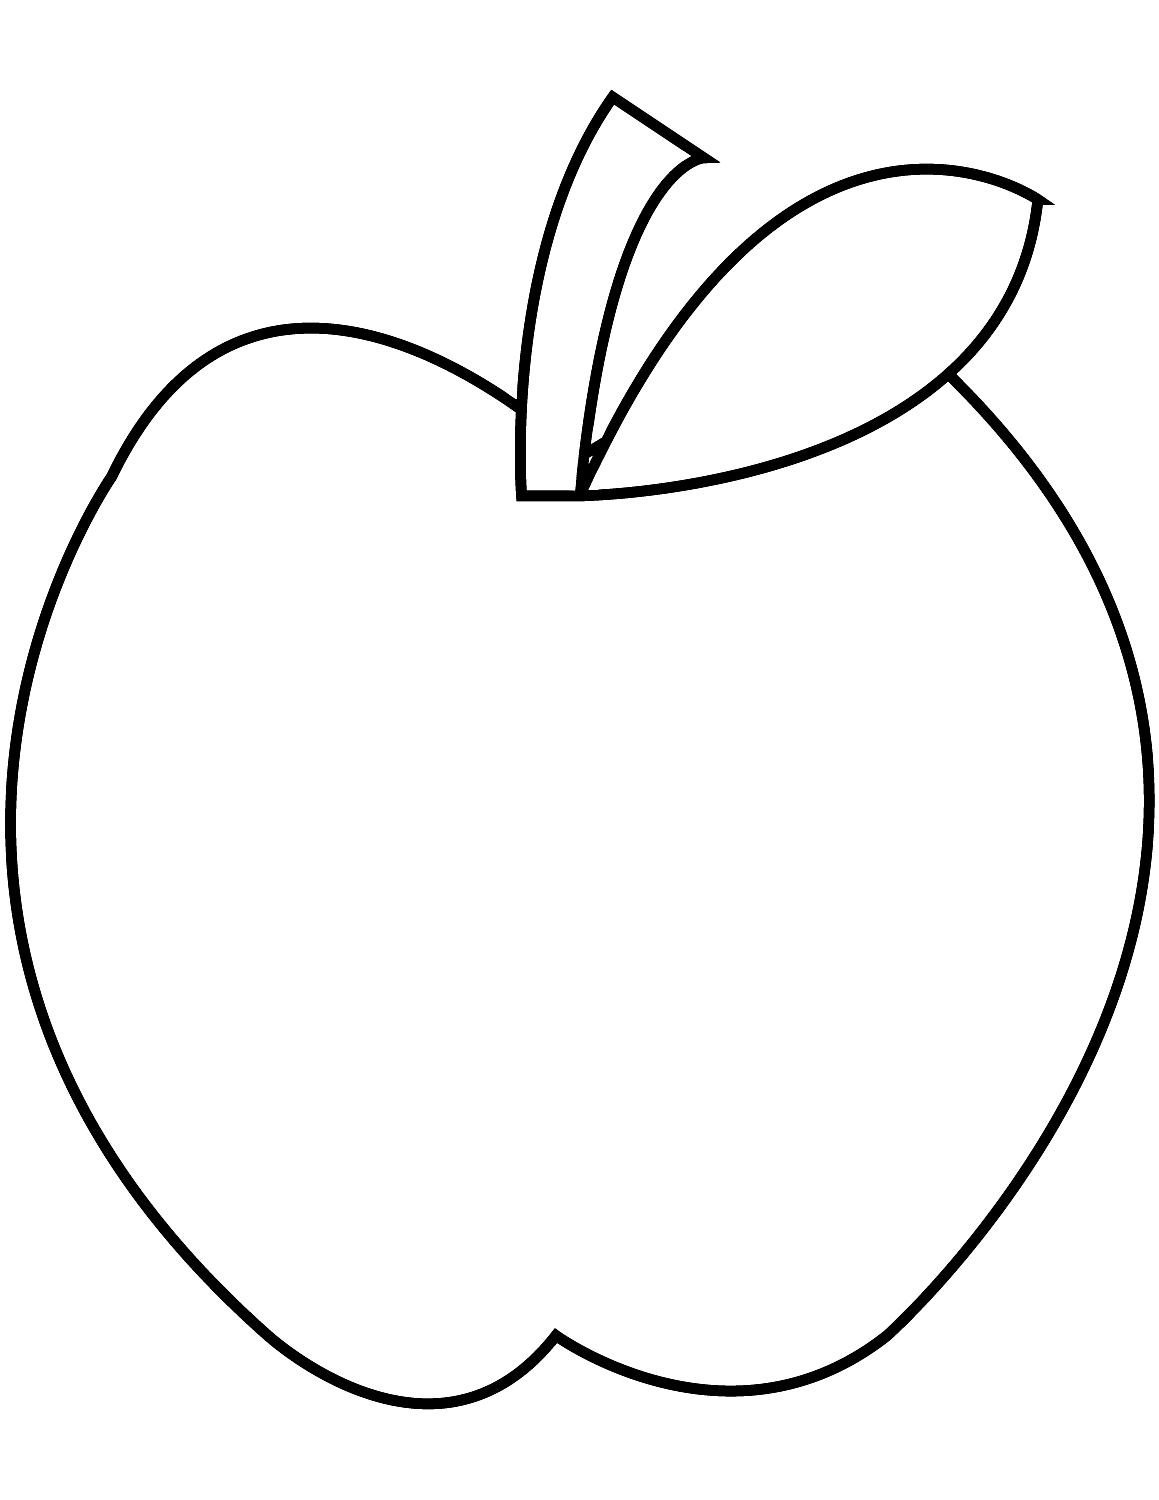 Apple 16  coloring pages to print and coloring